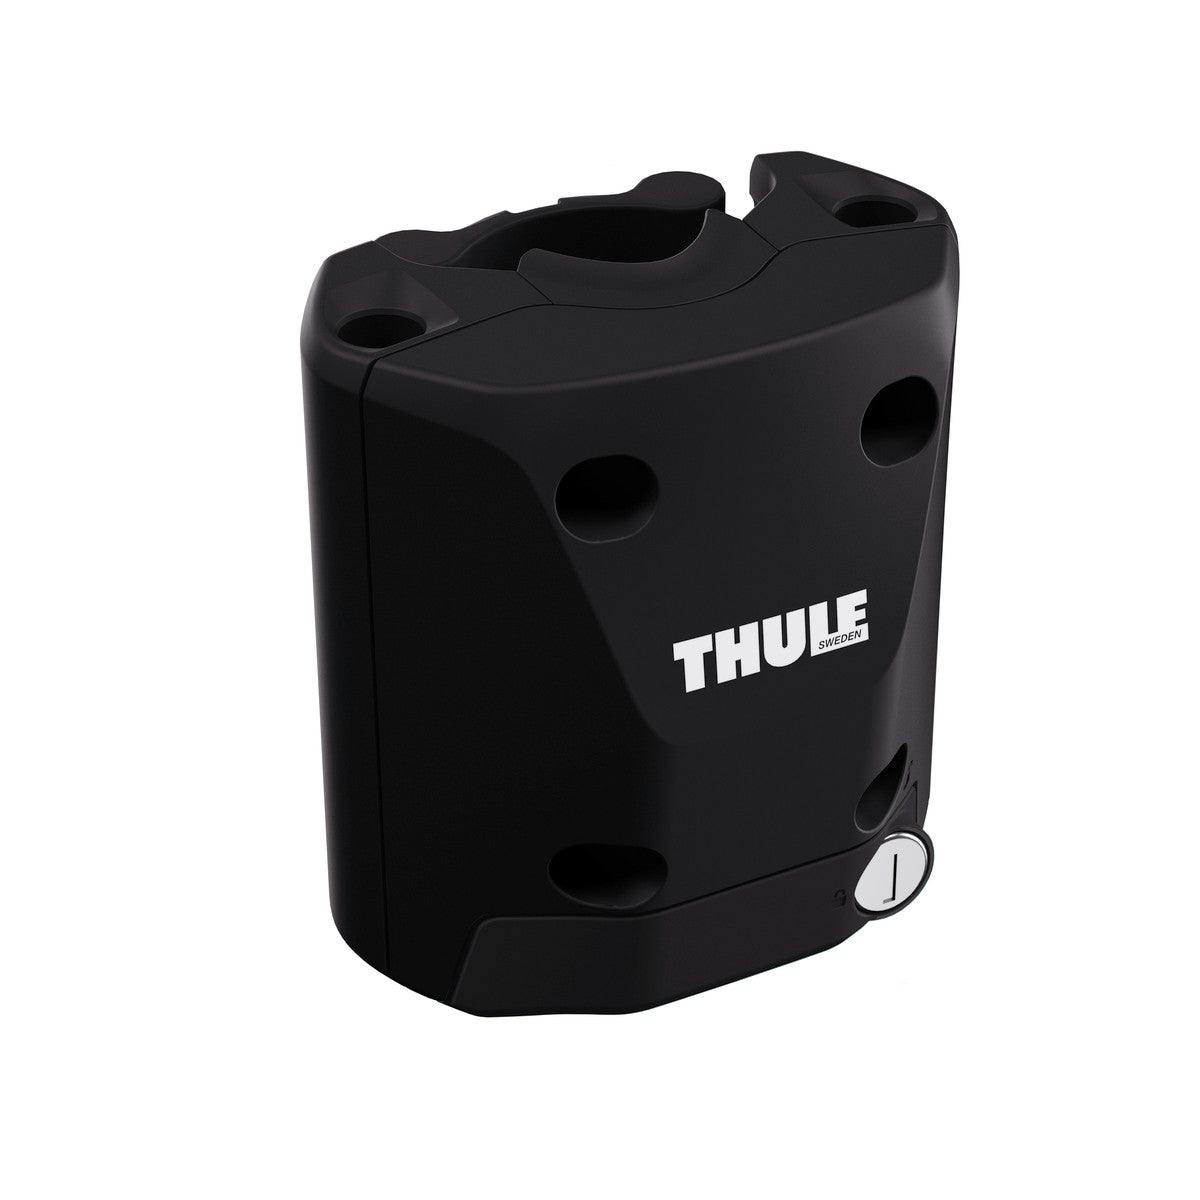 Thule Quick Release Bracket For Child Bike Seat